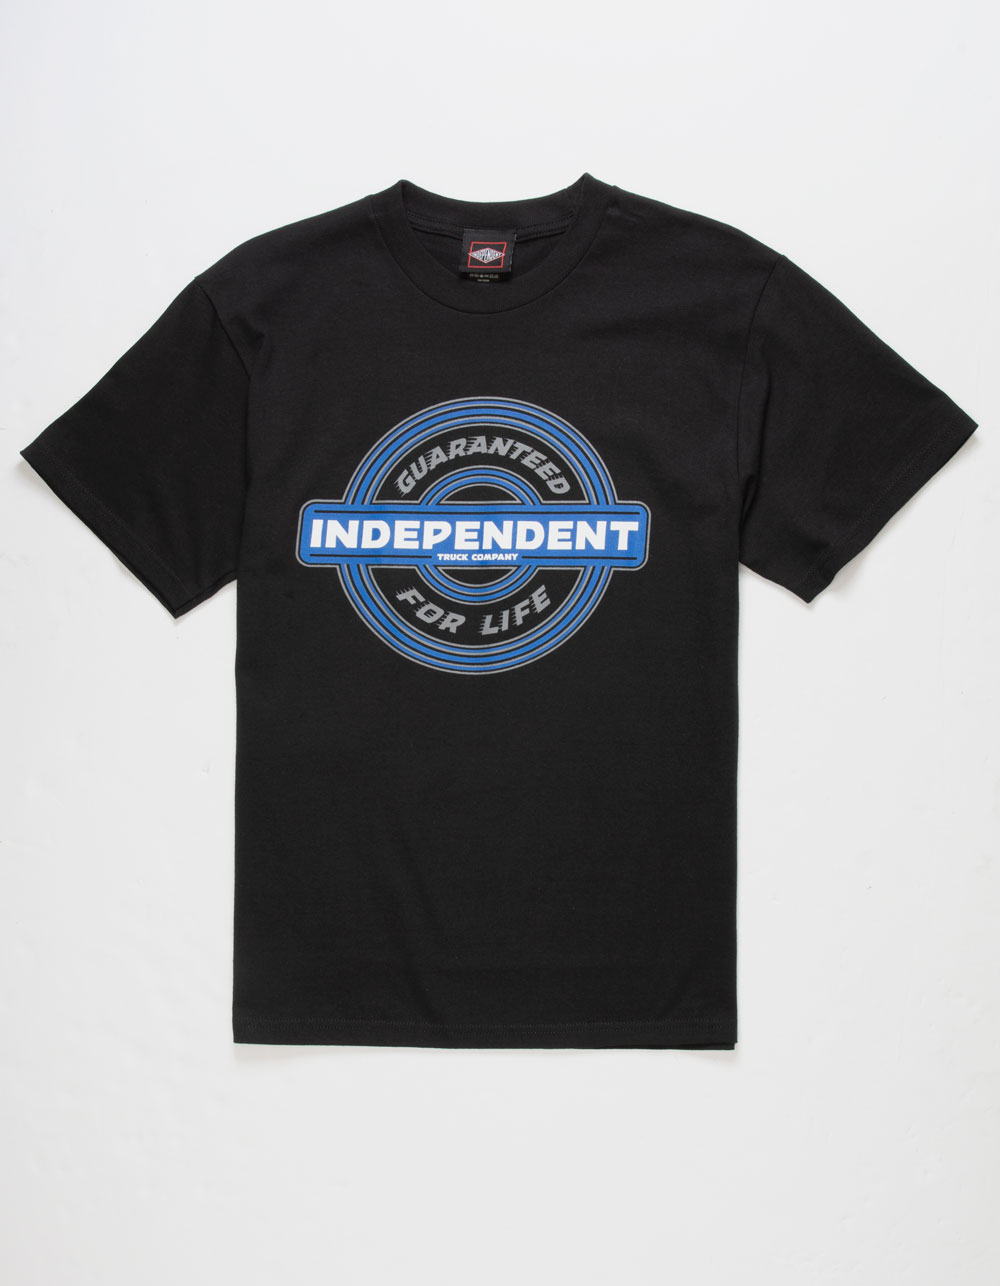 INDEPENDENT Guaranteed For Life Speed Mens Tee